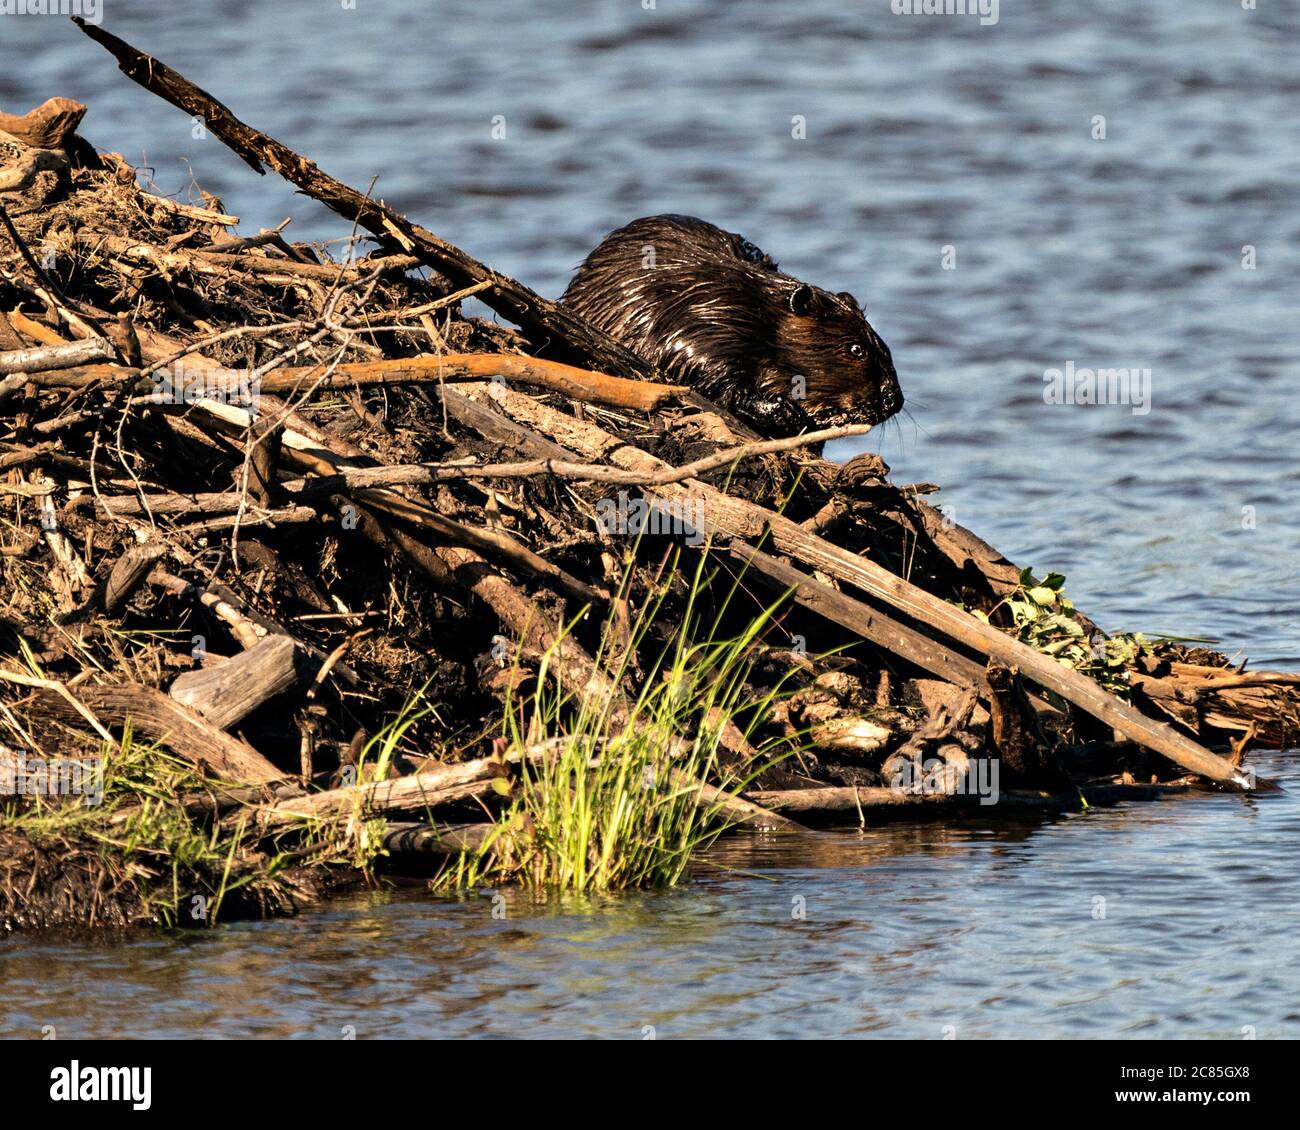 Beaver close-up profile view building a beaver lodge, displaying its brown fur, working skill  in its habitat and environment with a water background. Stock Photo